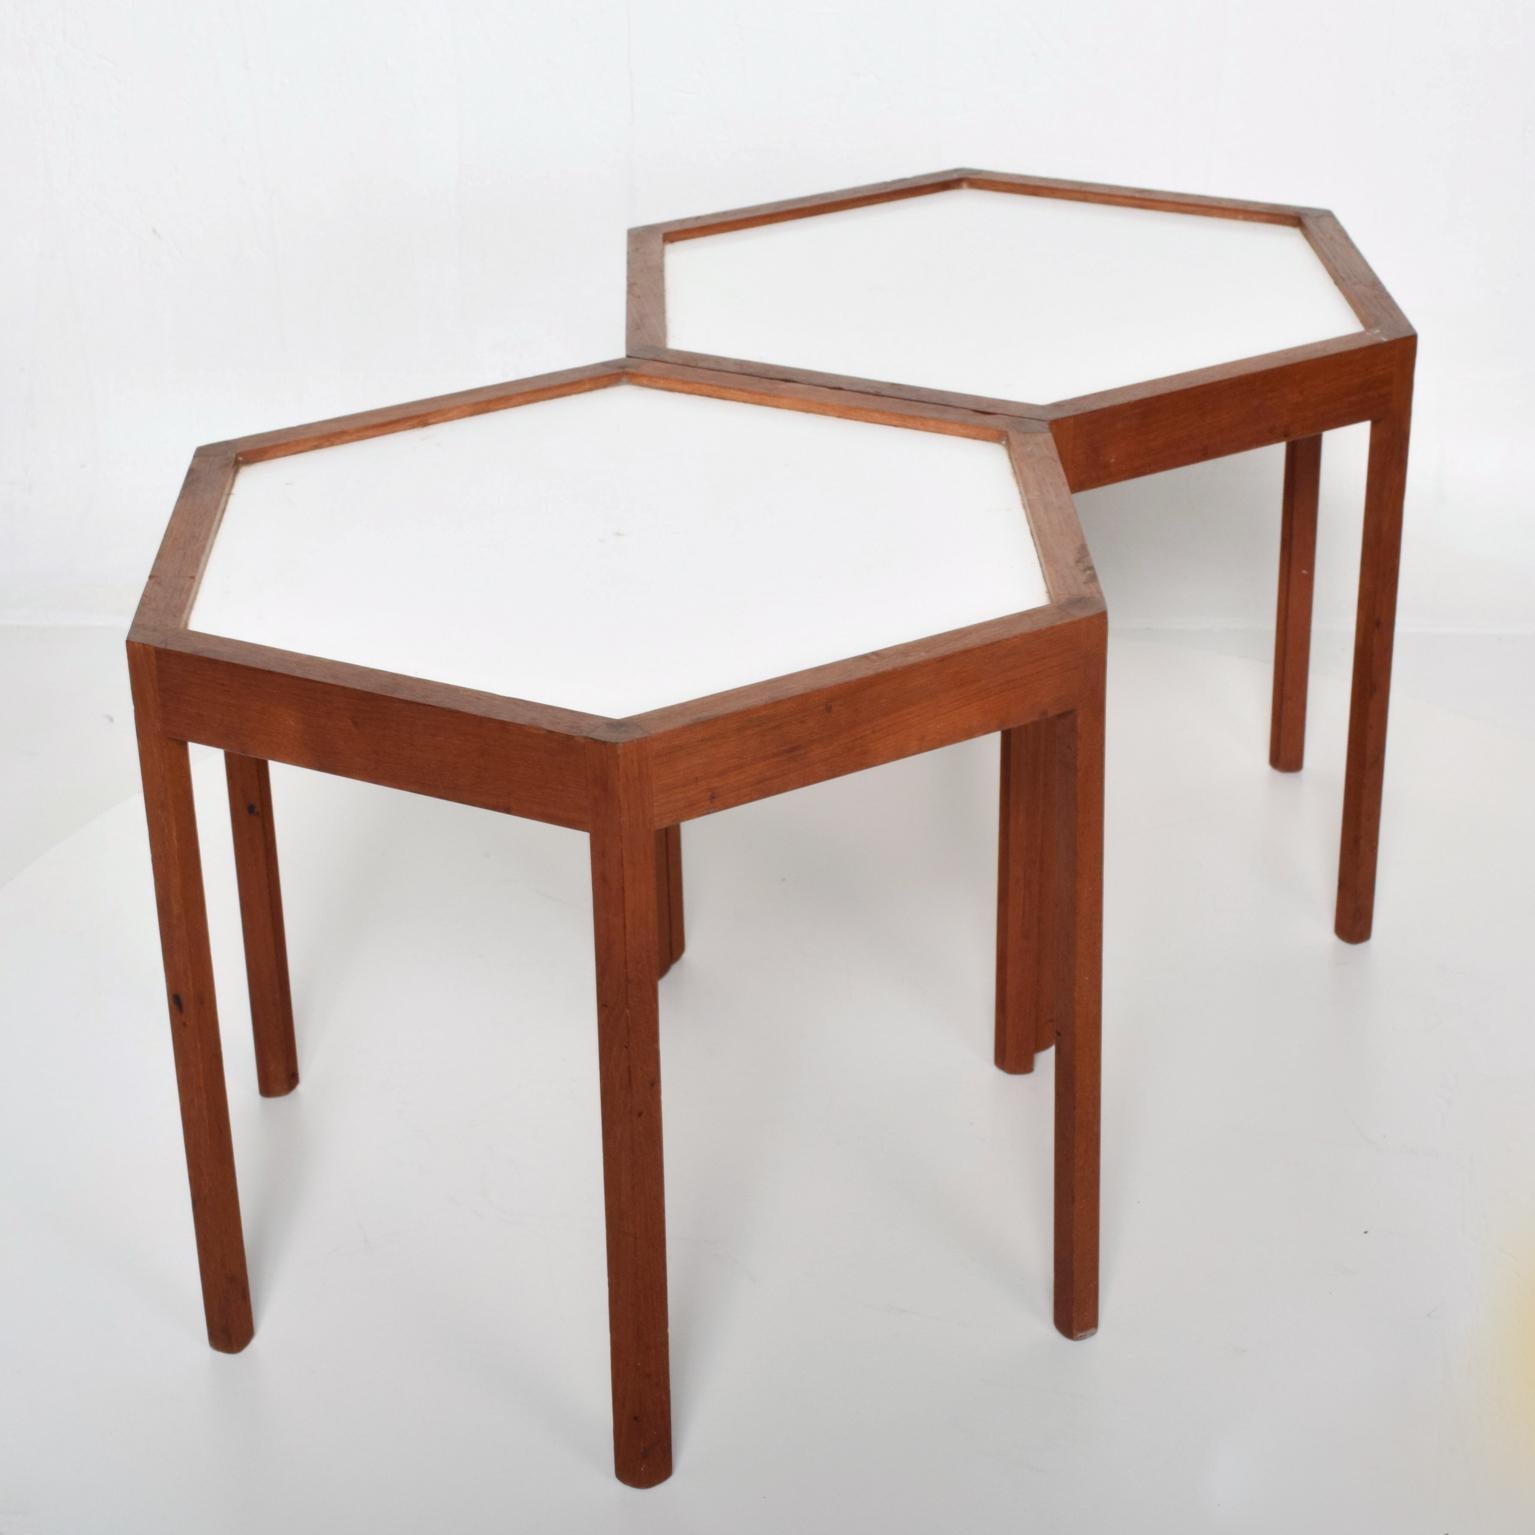 For your consideration, a pair of side tables by Has C. Andersen. Made in Denmark, circa 1960s. Hexagon shape with solid teak wood and white Formica top. Dimensions: 14 1/2